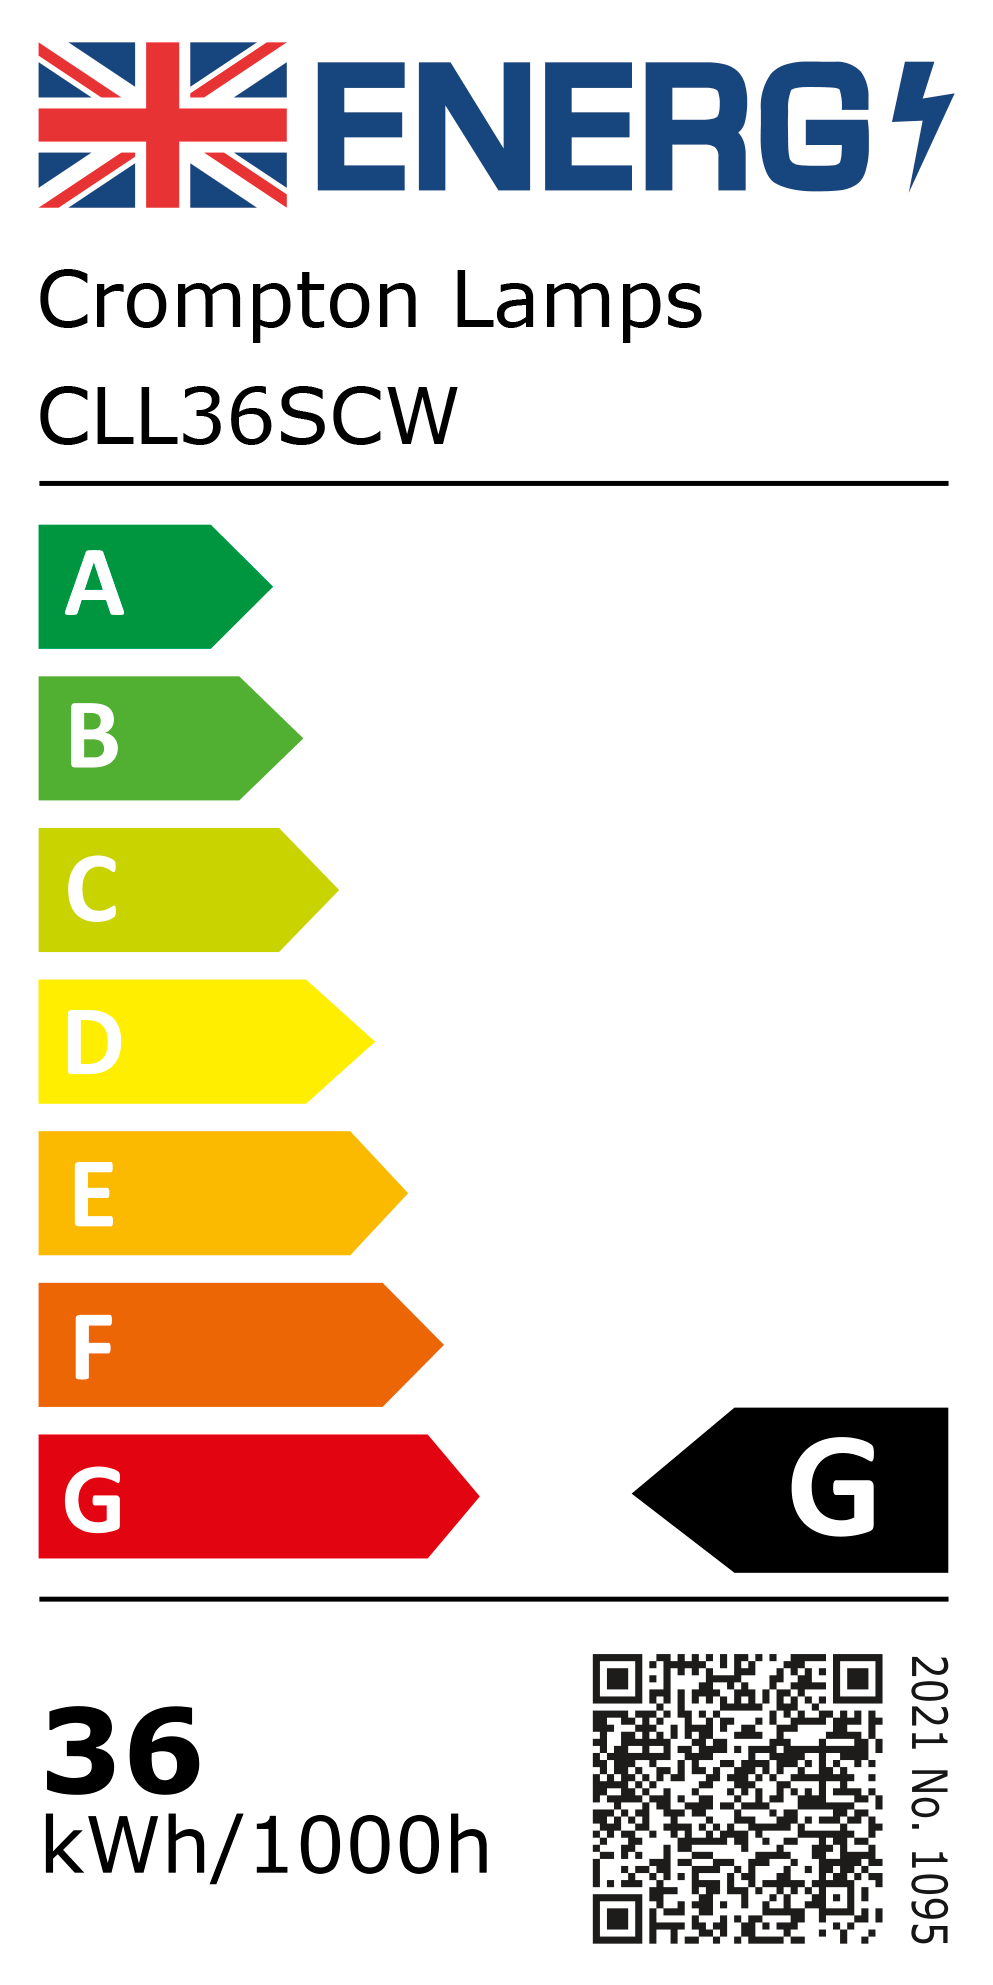 New 2021 Energy Rating Label: Stock Code CLL36SCW